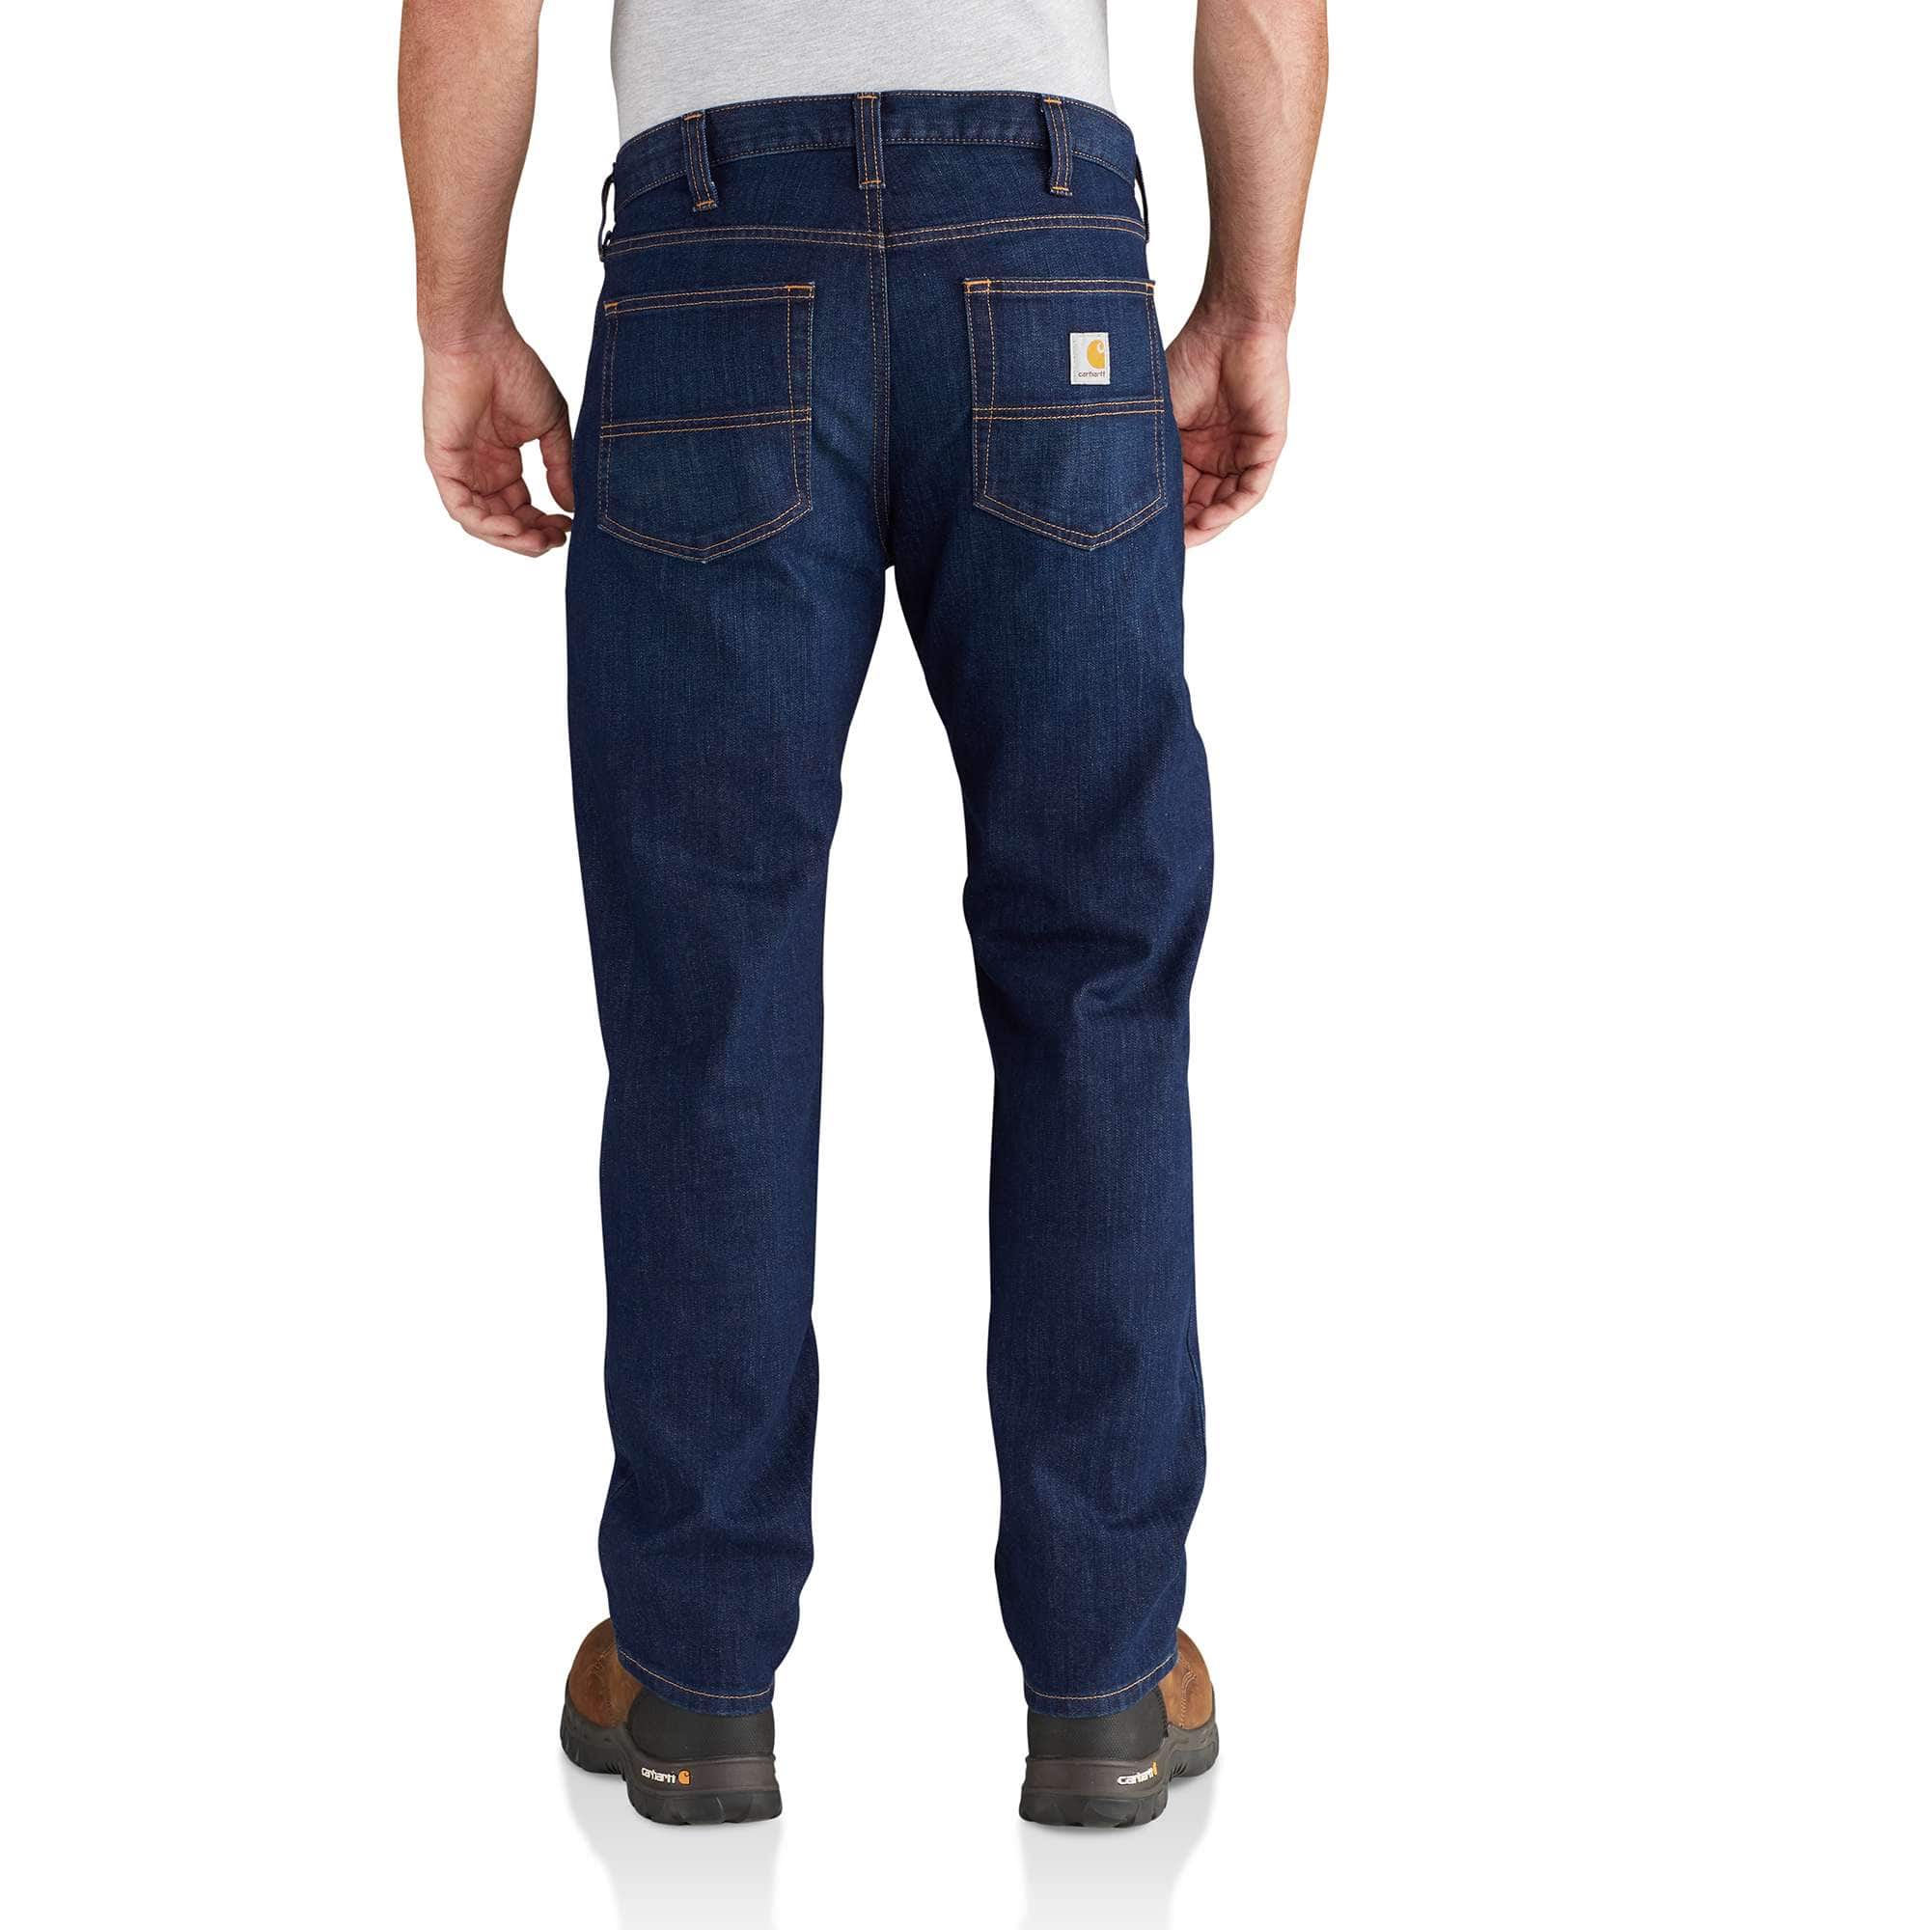 Carhartt Men's Relaxed Fit Carpenter Jeans Assorted Sizes NEW!!! Jeans ...